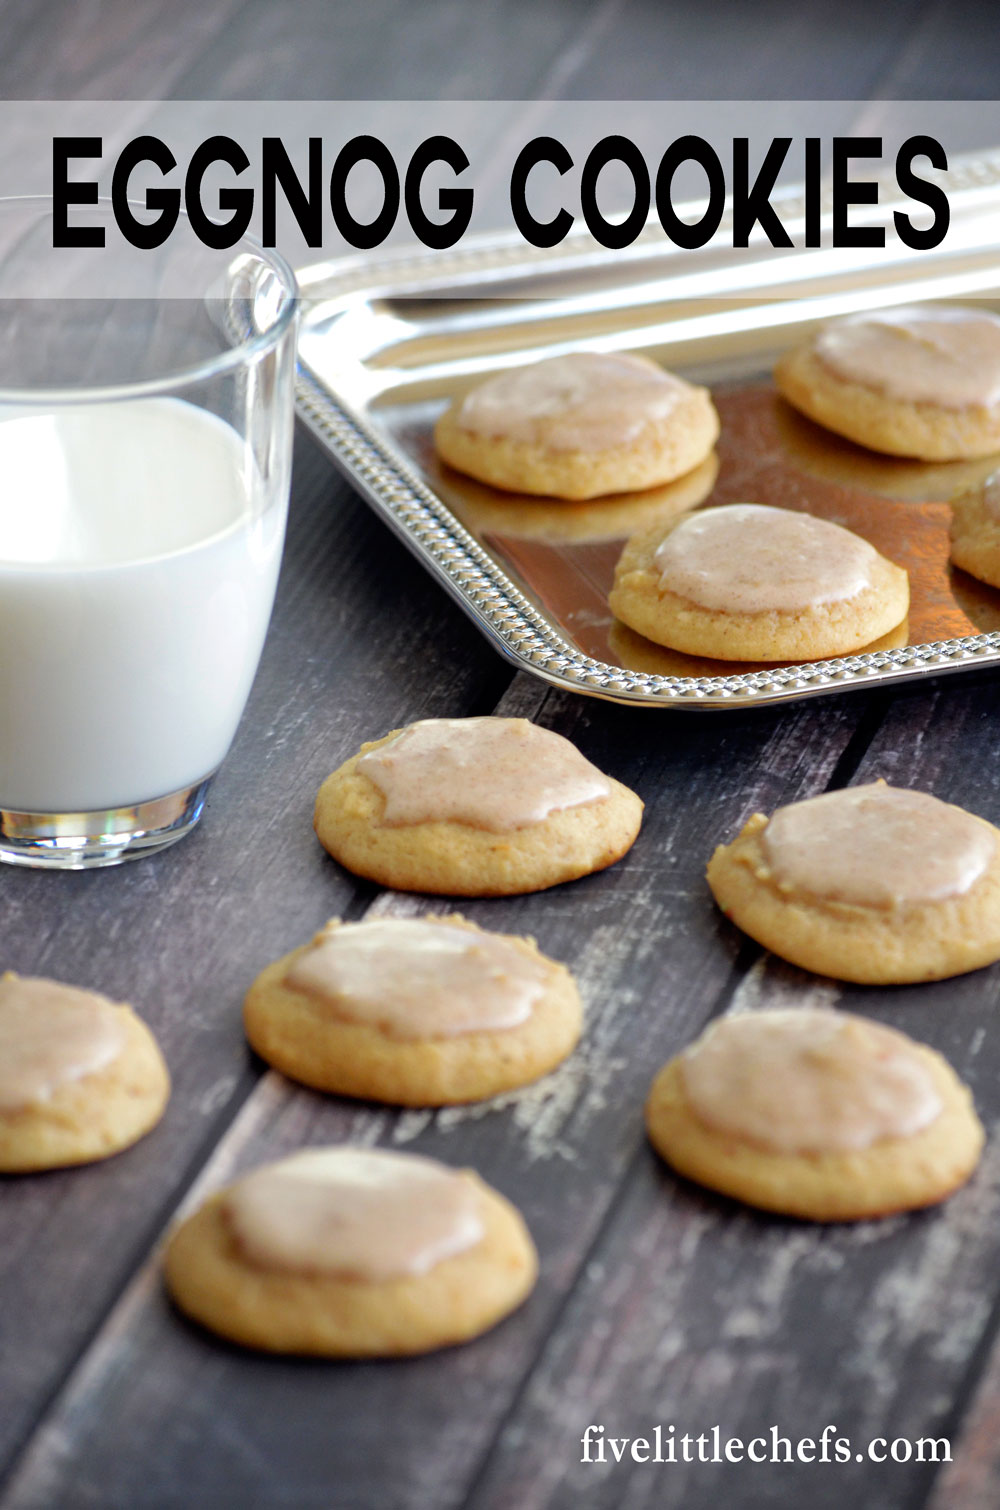 Eggnog cookies is an easy recipe with an eggnog icing. They are soft and almost melt in your mouth. These will get you in the holiday mood.